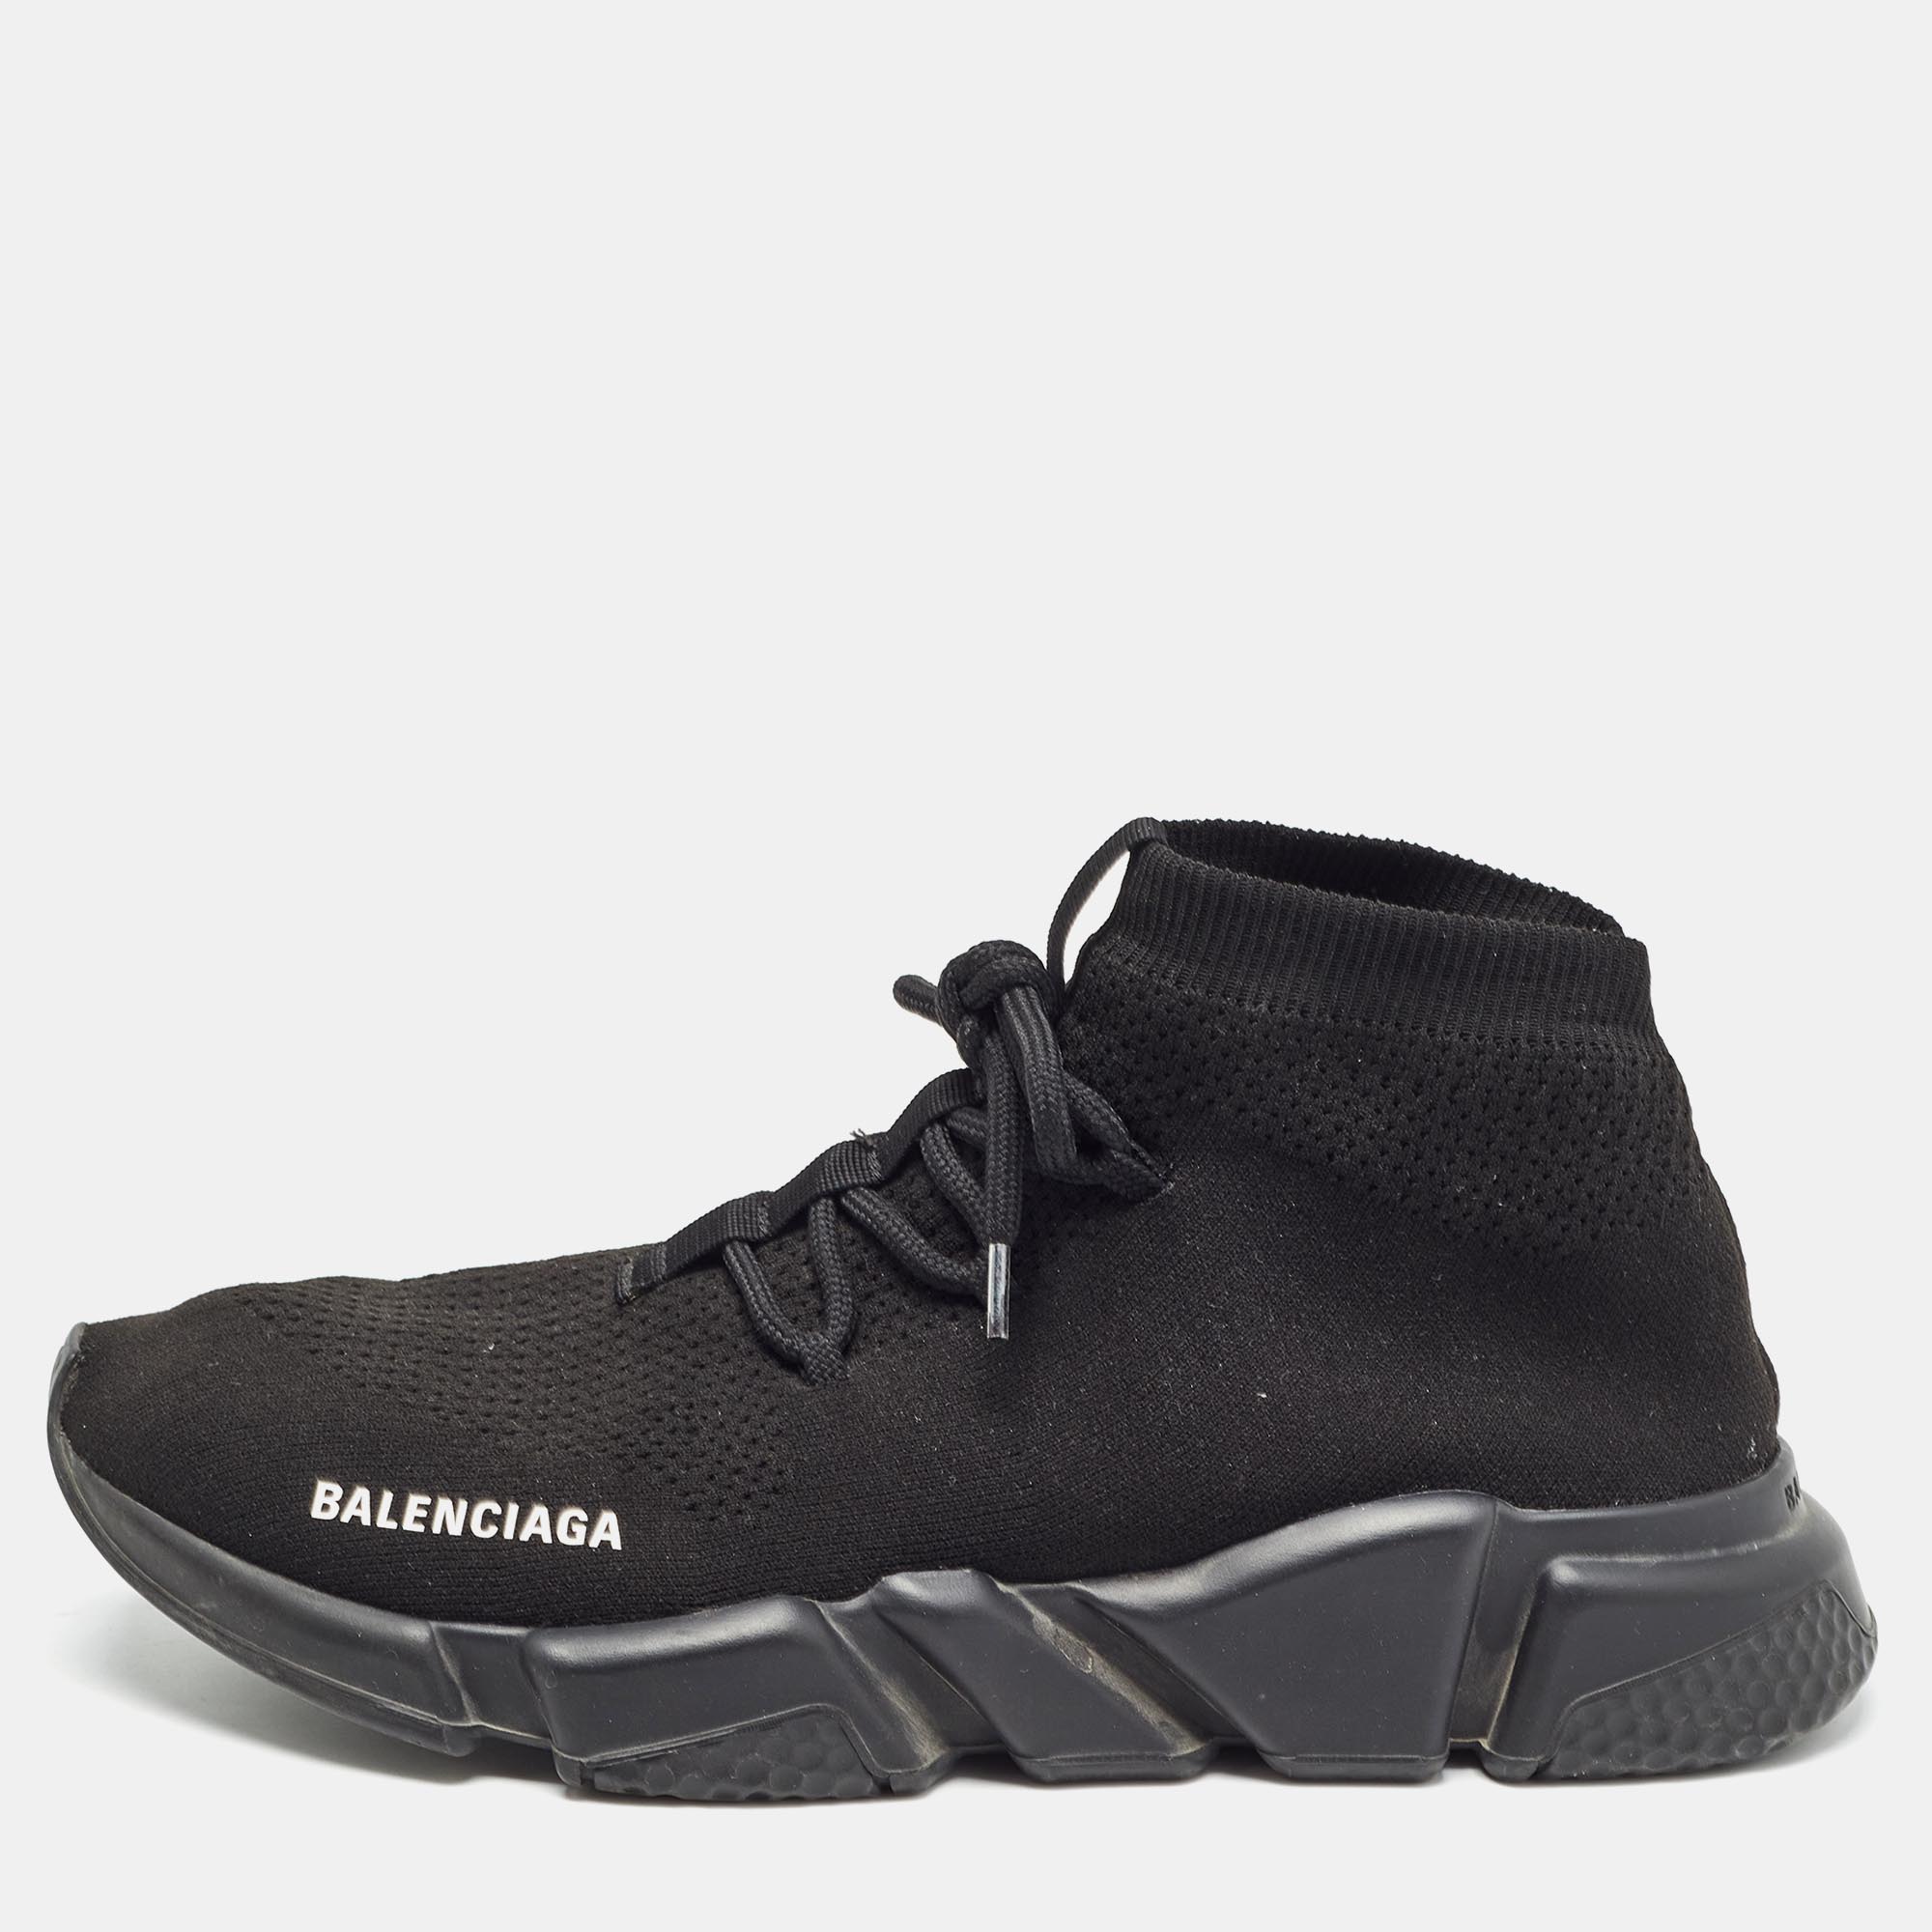 Pre-owned Balenciaga Black Knit Fabric Speed Trainer Sneakers Size 42